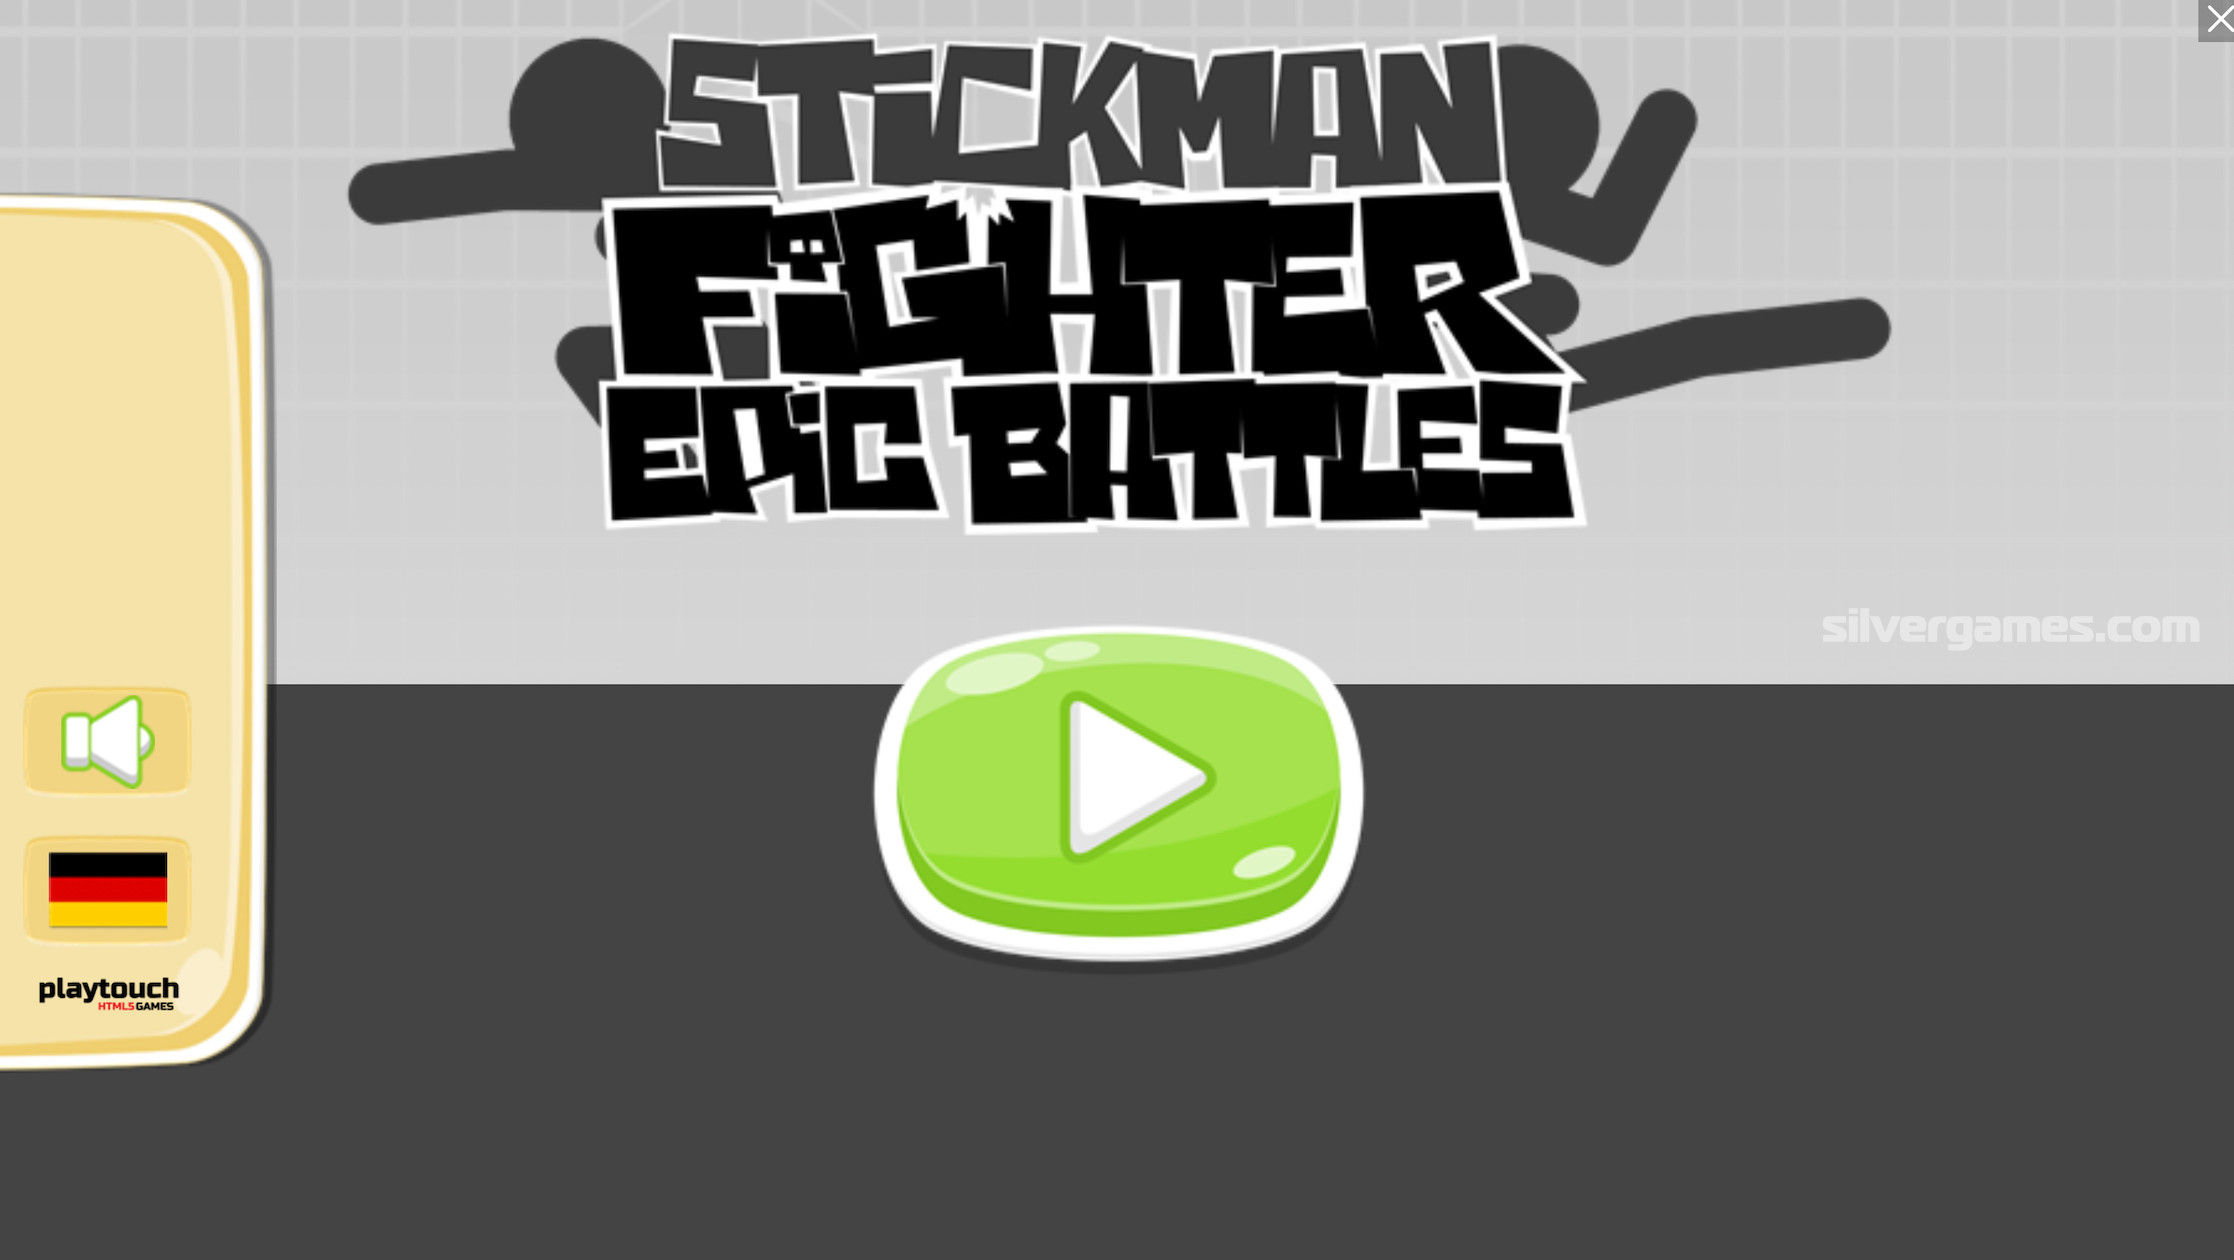 Fall Red Stickman - Play Online on SilverGames 🕹️